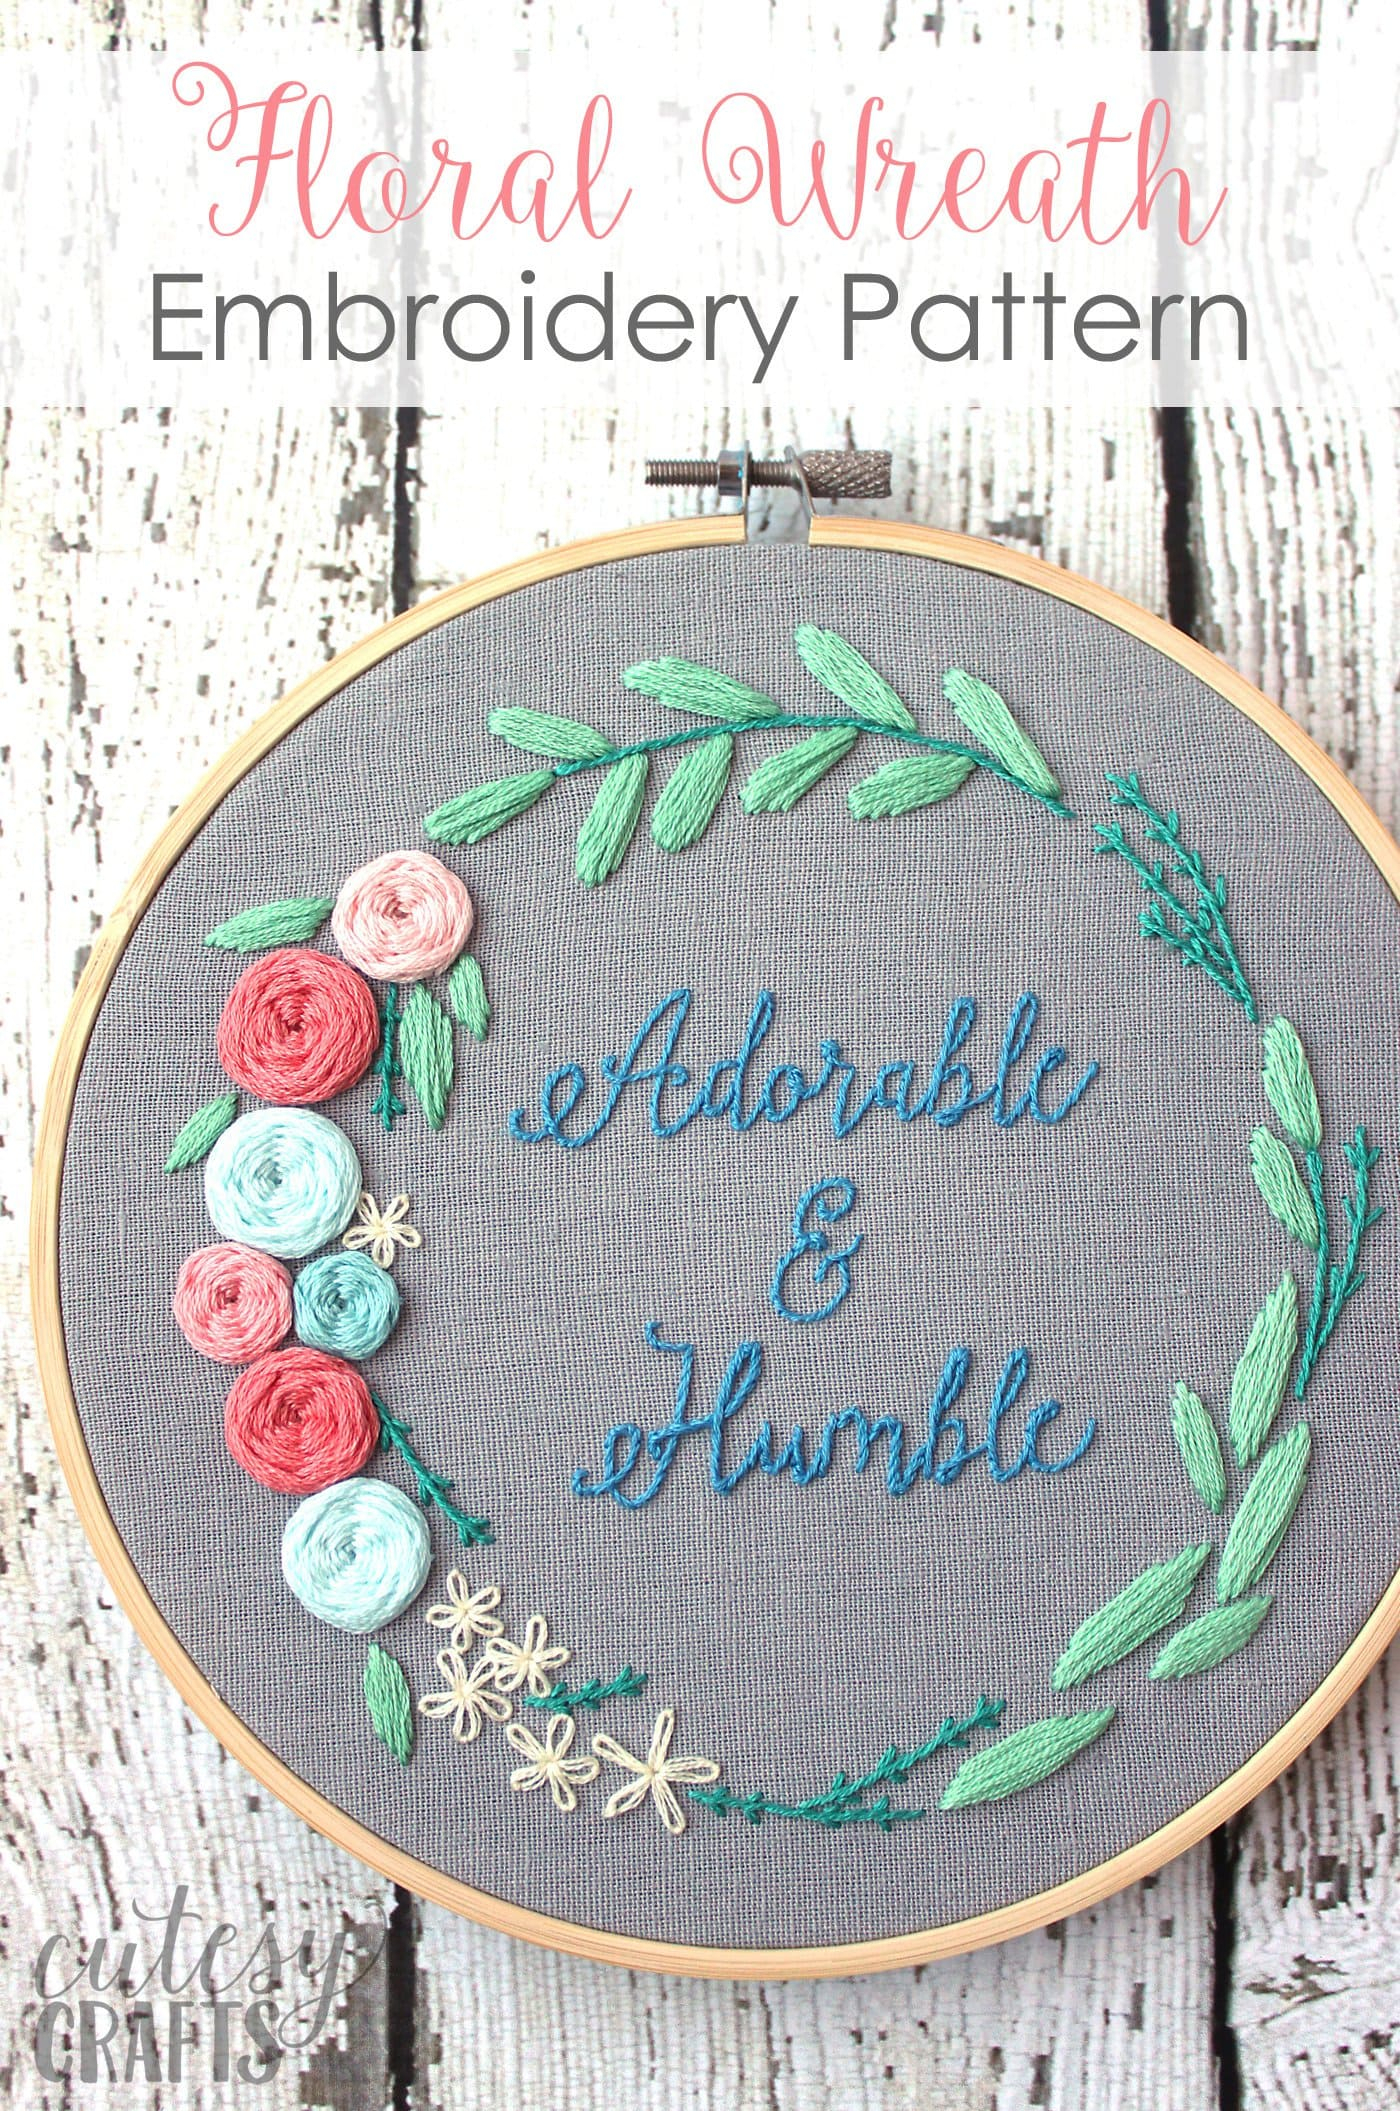 How To Create Embroidery Patterns Adorable And Humble Free Floral Wreath Hand Embroidery Pattern